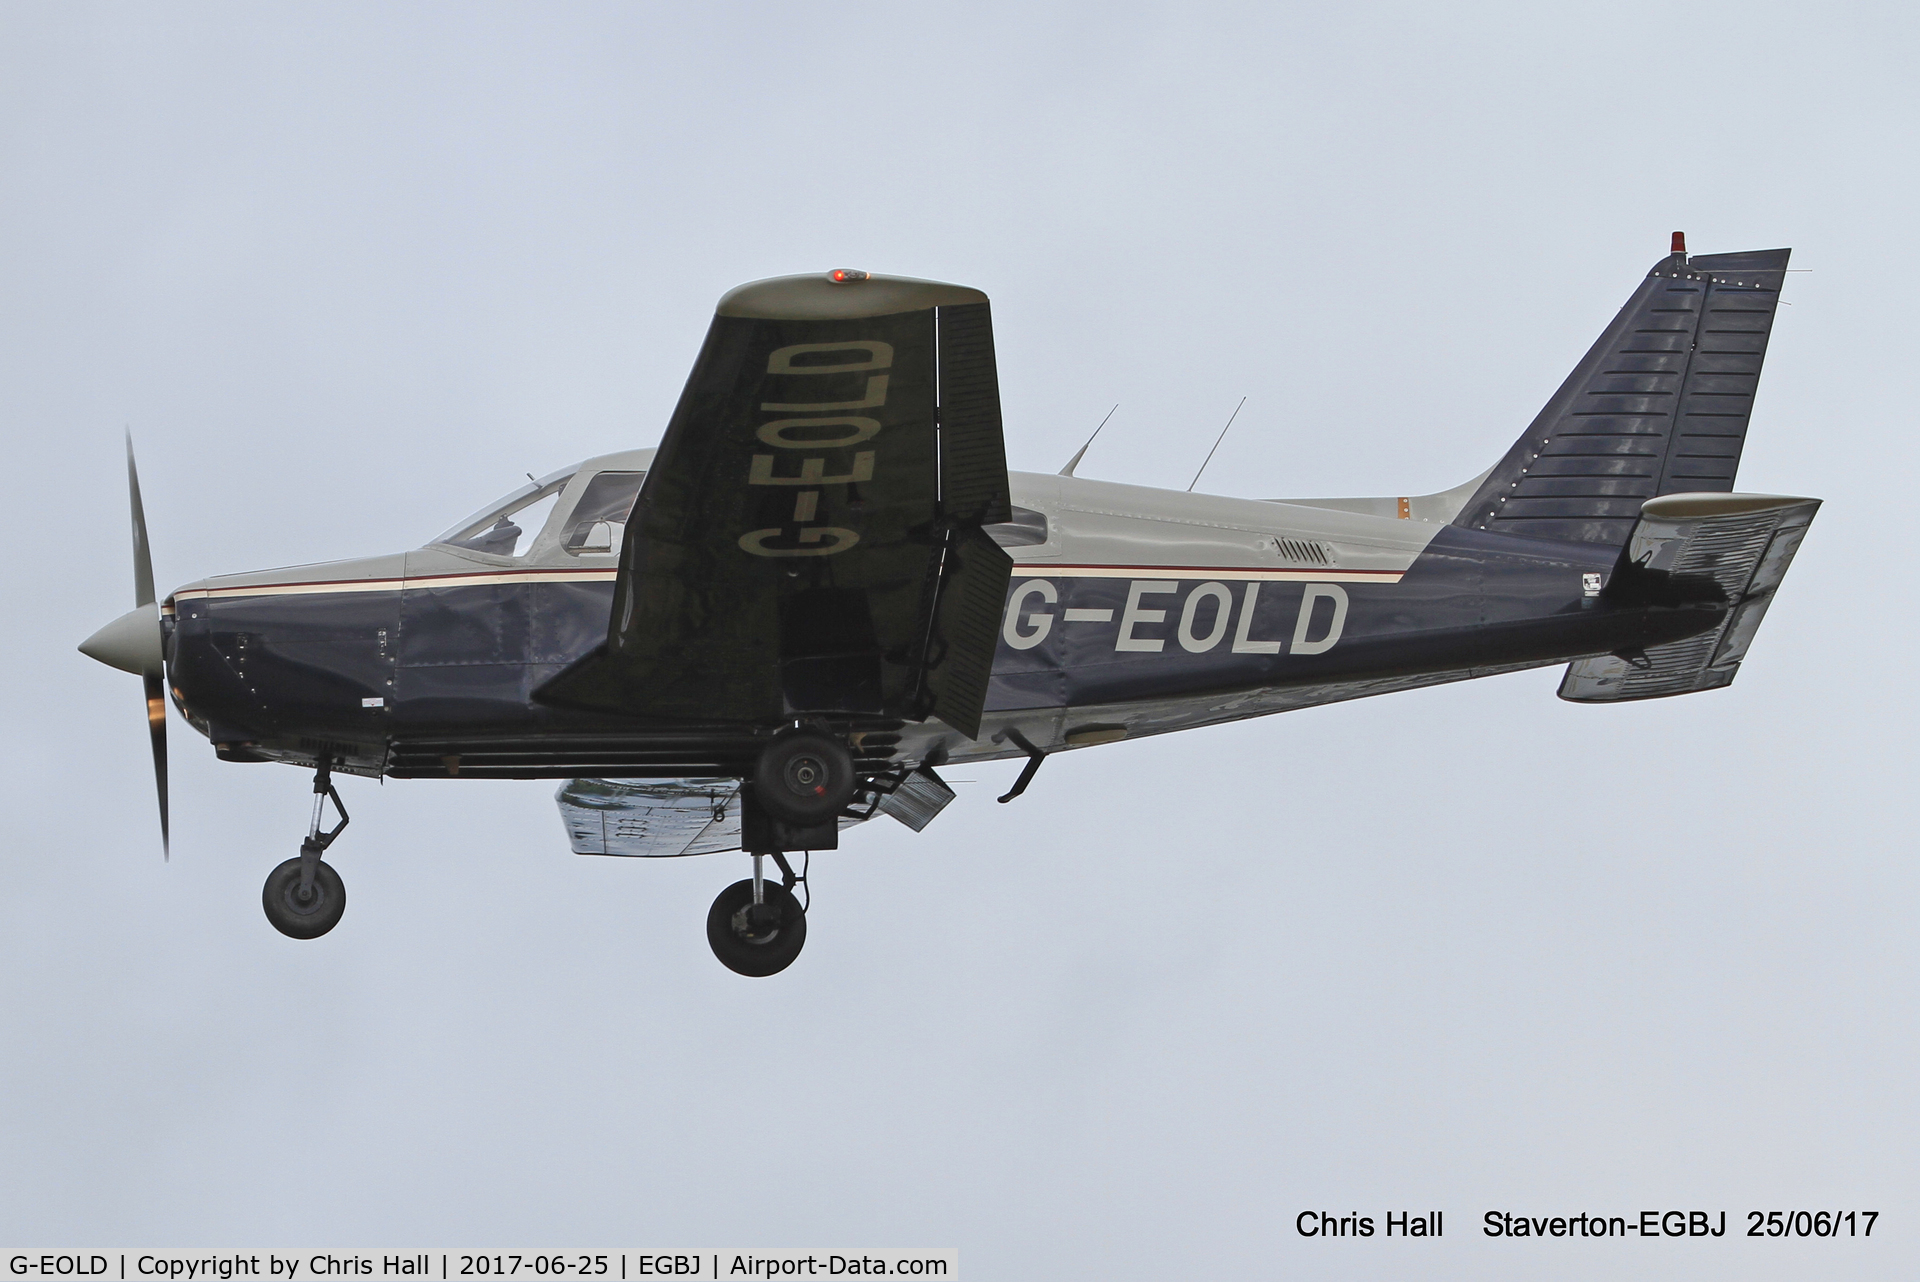 G-EOLD, 1985 Piper PA-28-161 Cherokee Warrior II C/N 28-8516030, Project Propeller at Staverton